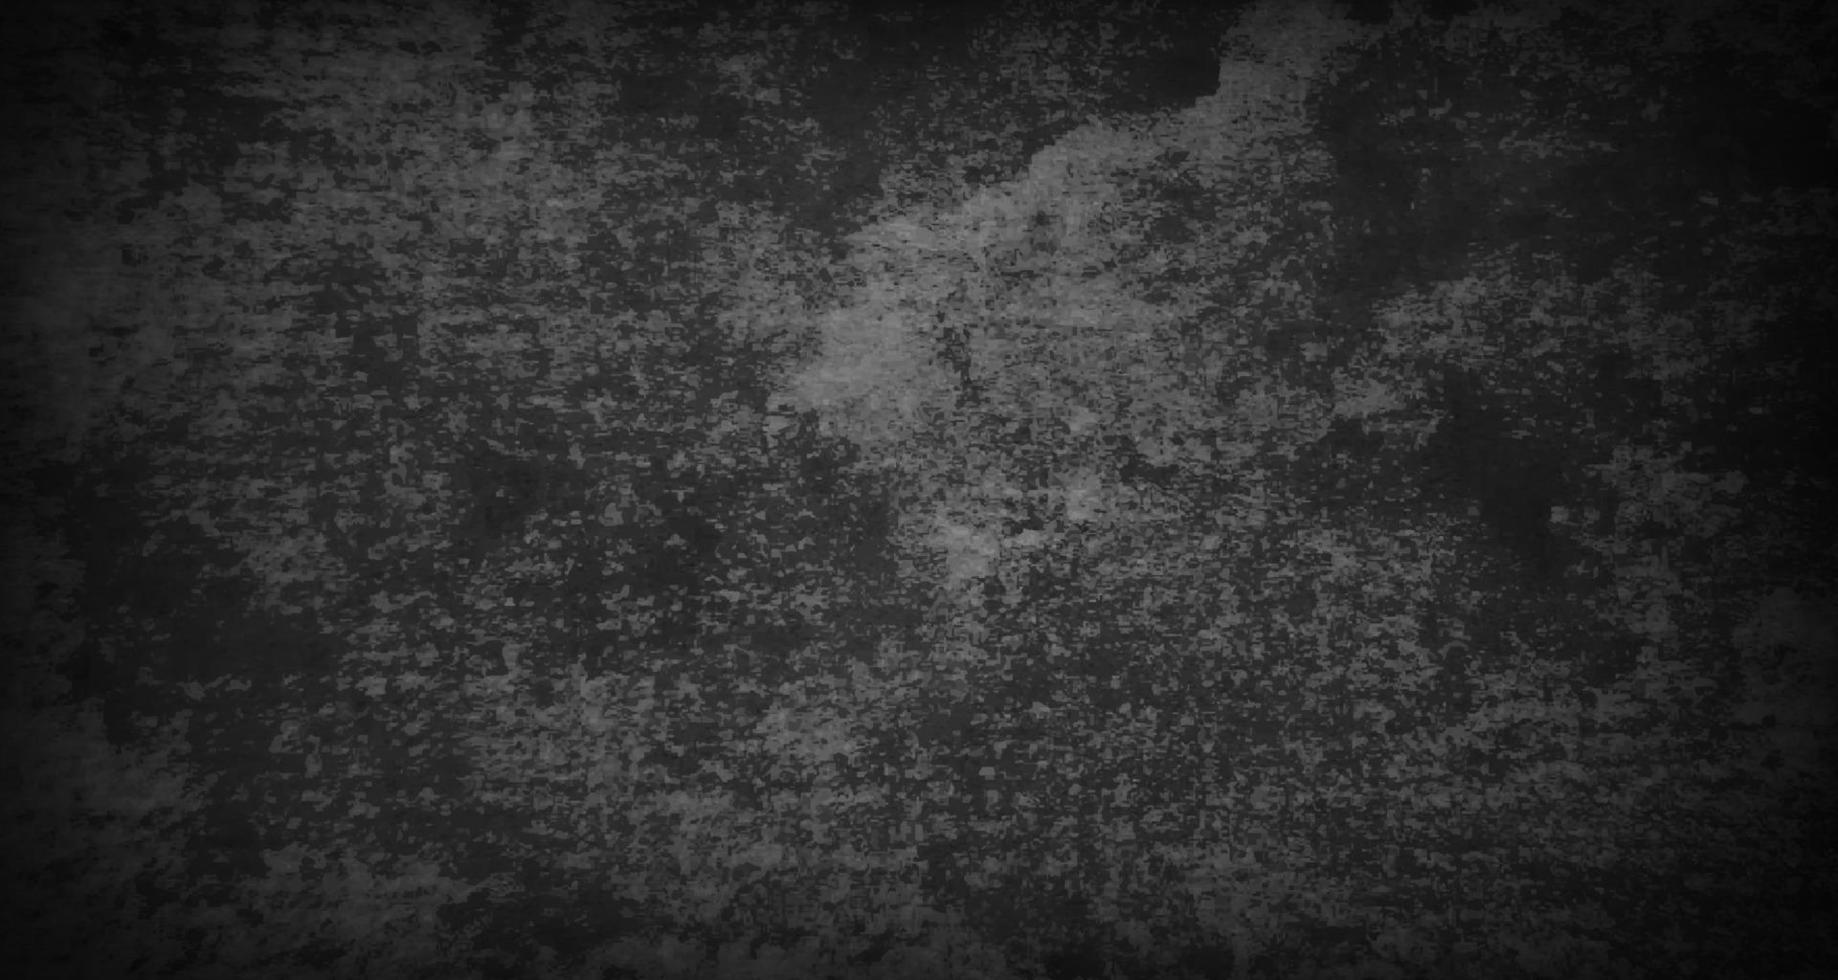 Grunge texture effect. Distressed overlay rough textured. Realistic black abstract background. Graphic design template element concrete wall style concept for banner, flyer, poster, or brochure cover vector